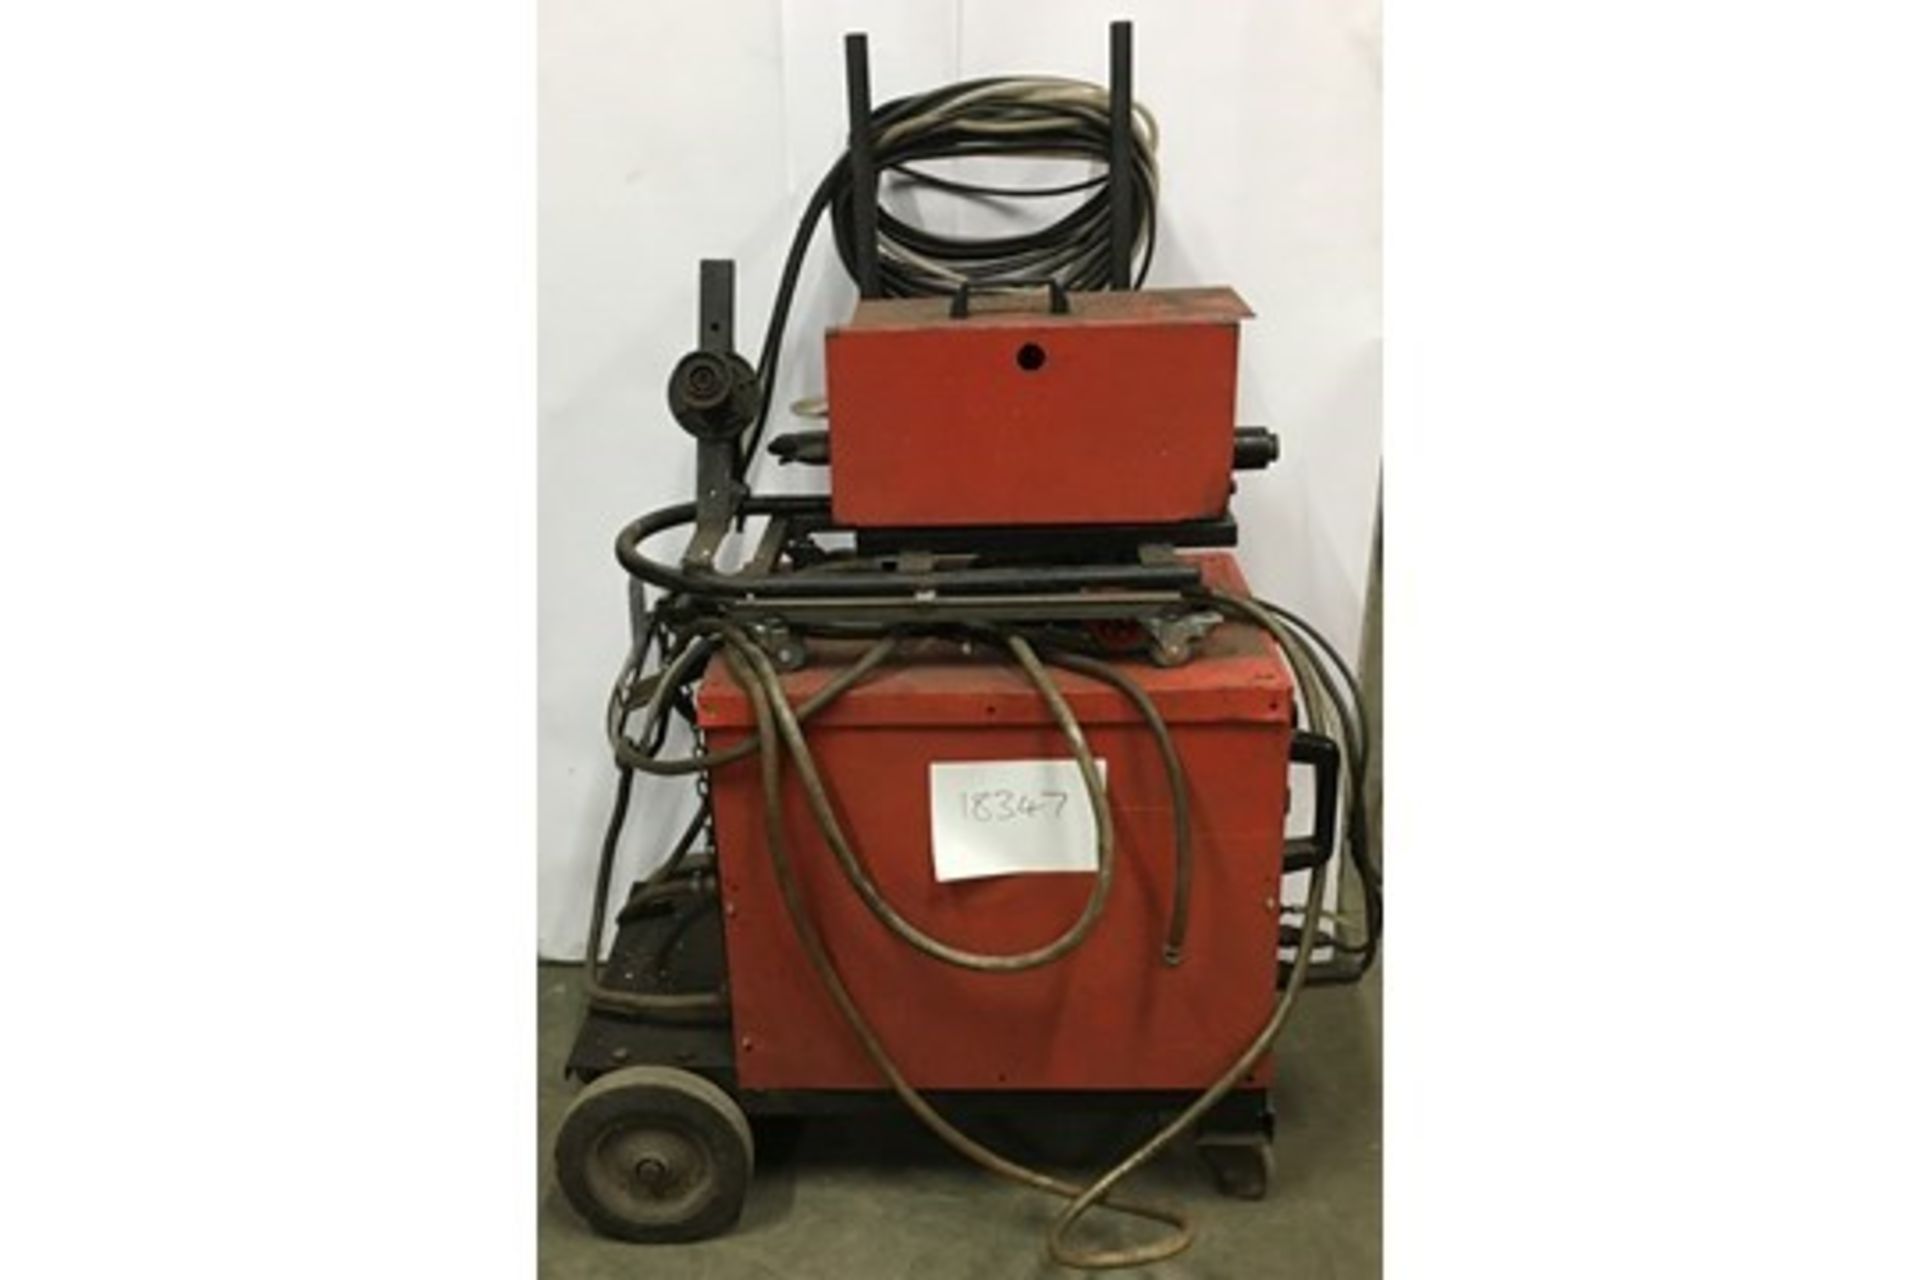 Butters 9000 Series NBC 380 Mig Welder with Sterling Multifeed 25 Wire Feed Unit - Image 2 of 5